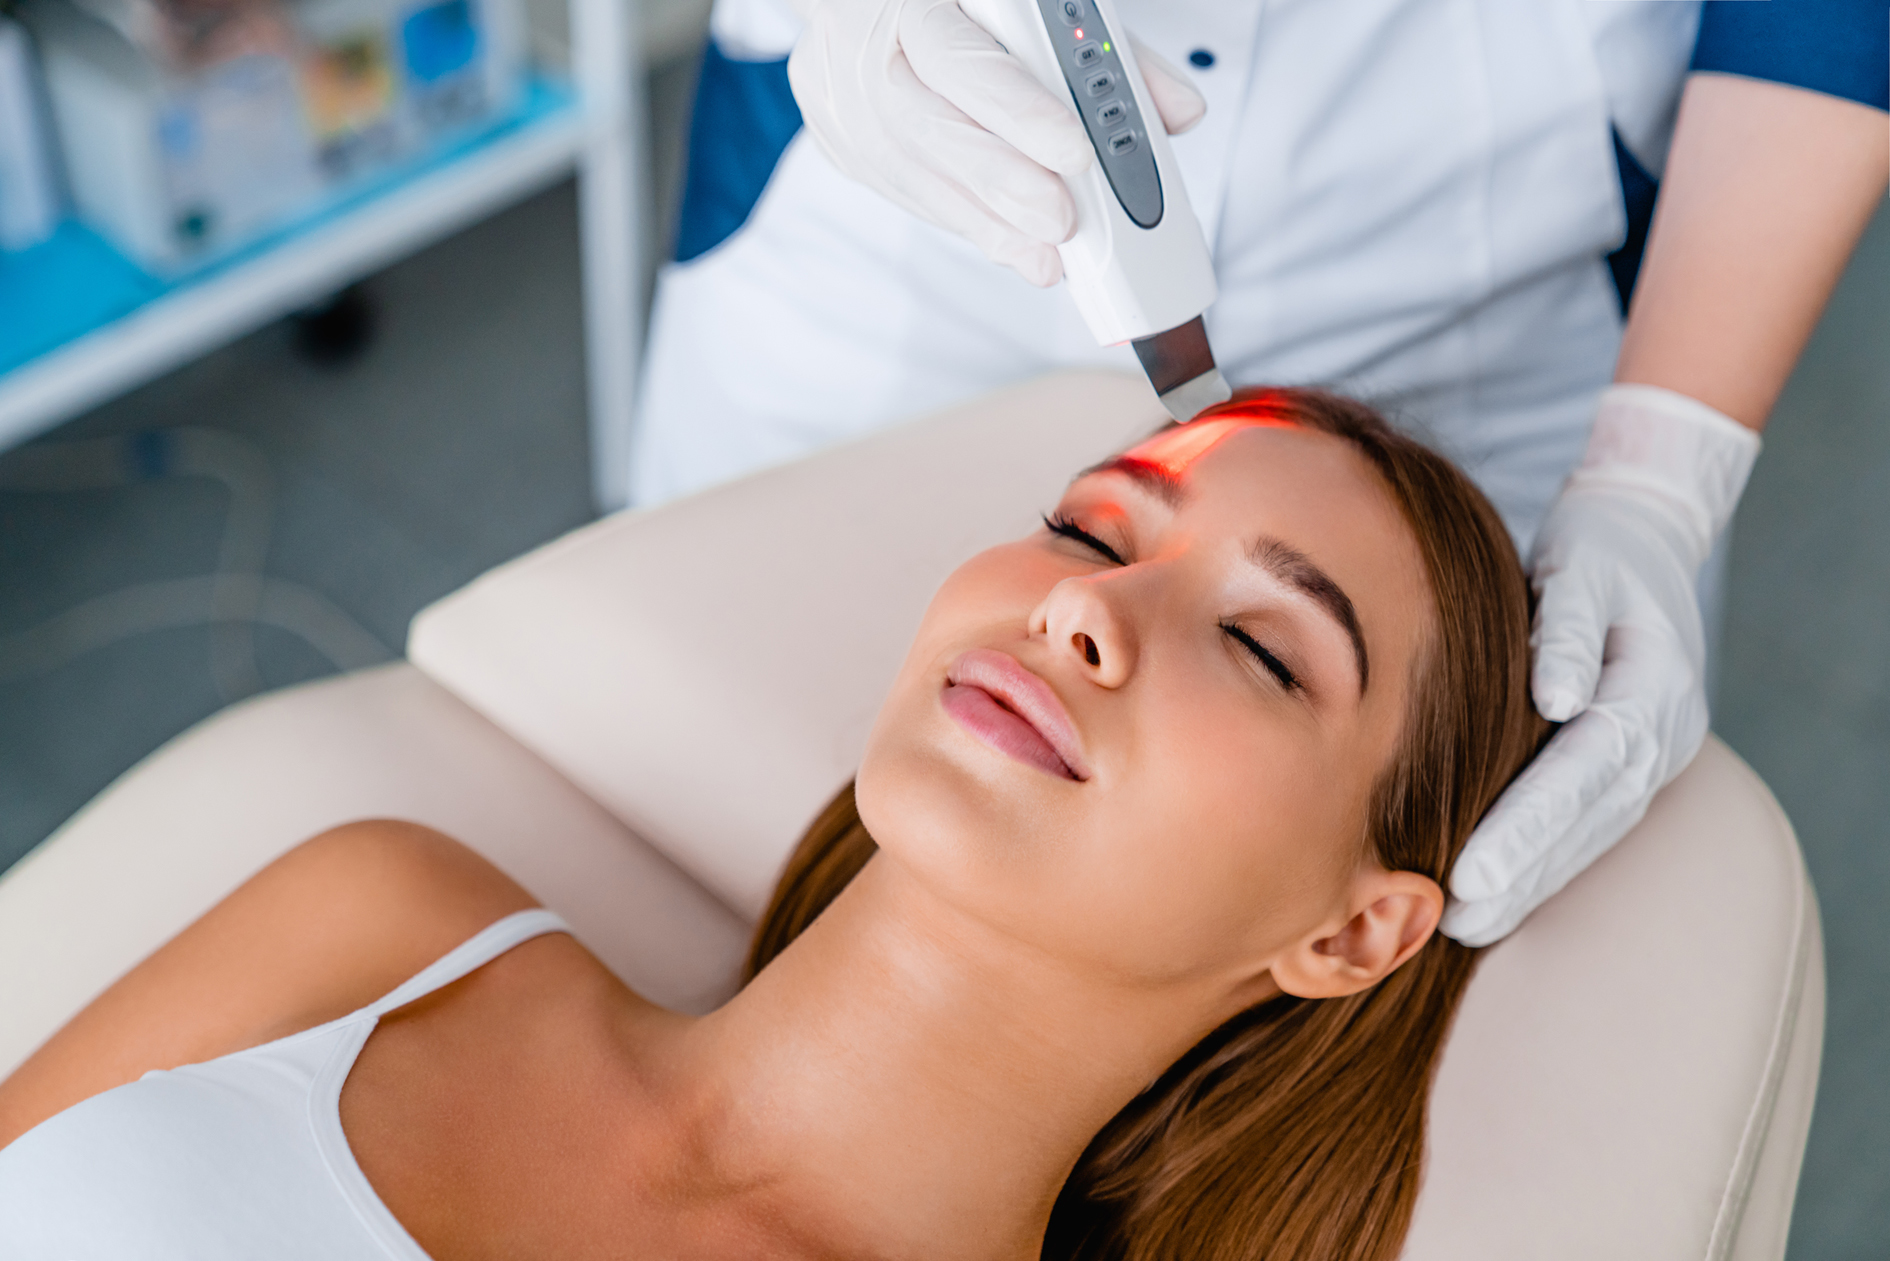 How much does Aesthetic procedures cost?